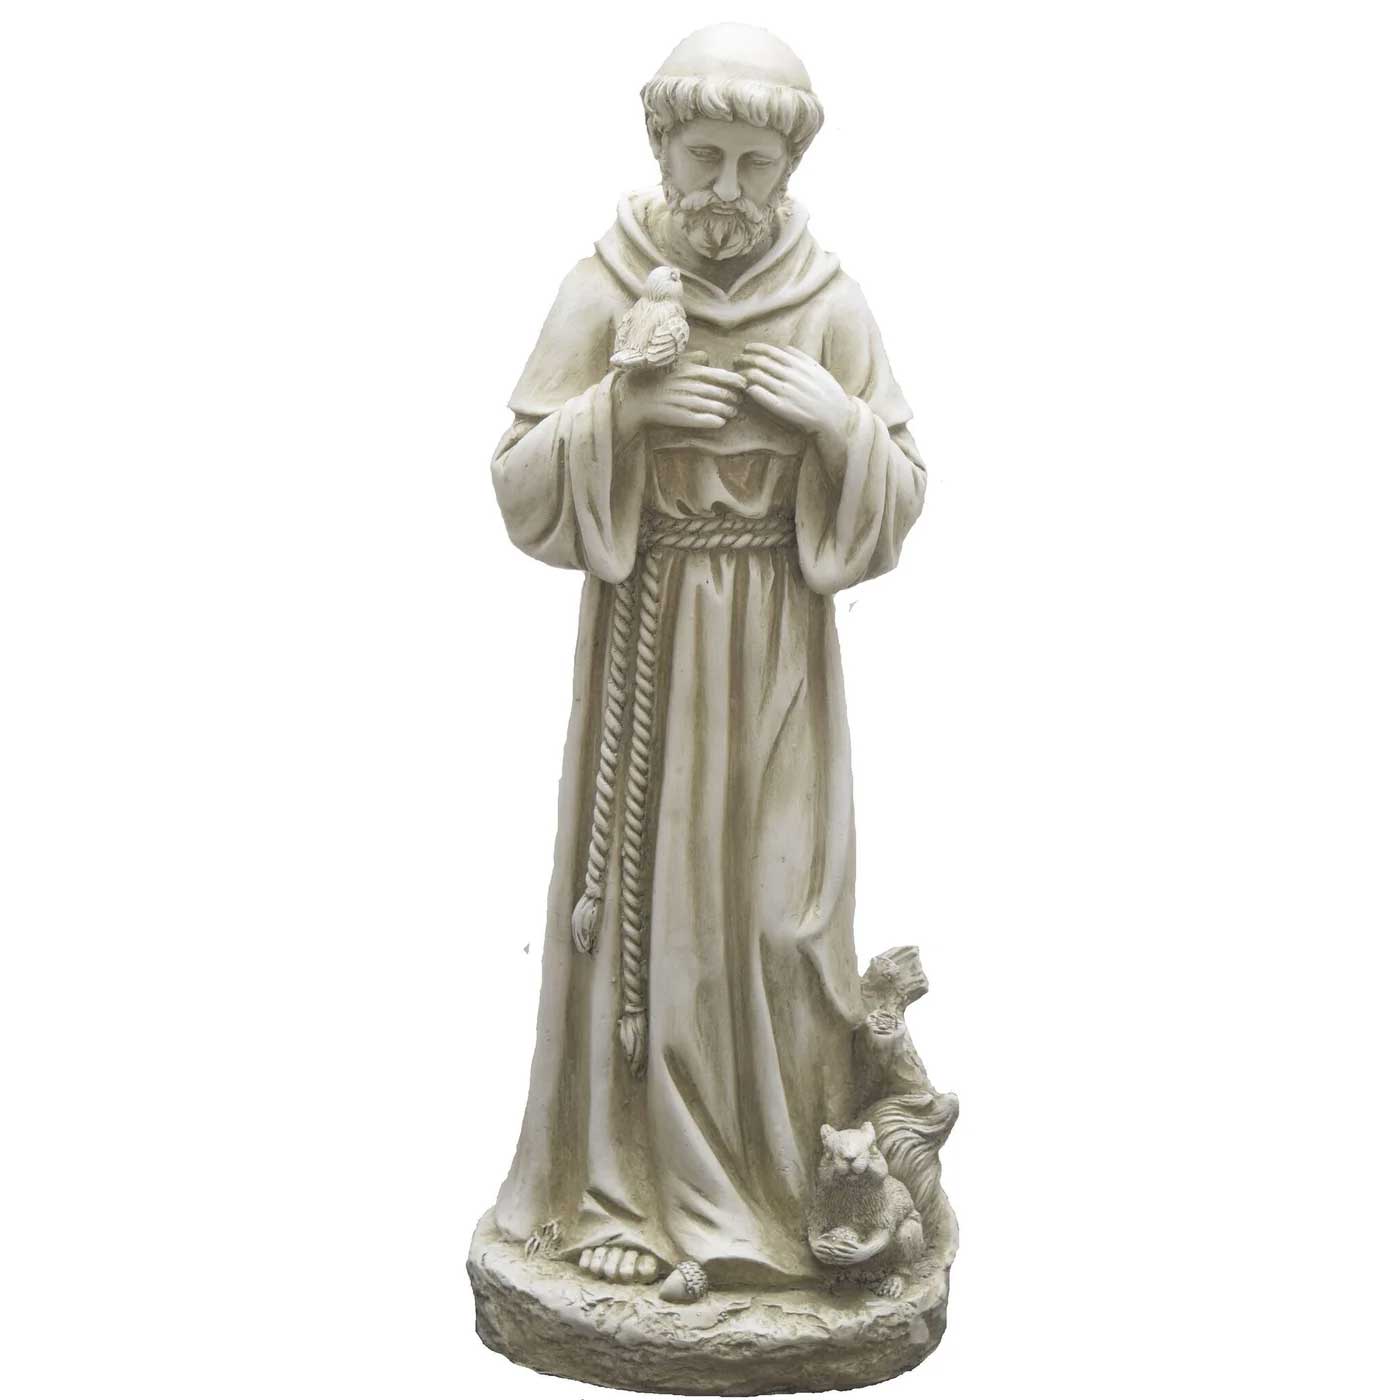 St. Francis of Assisi 16" Garden Statue